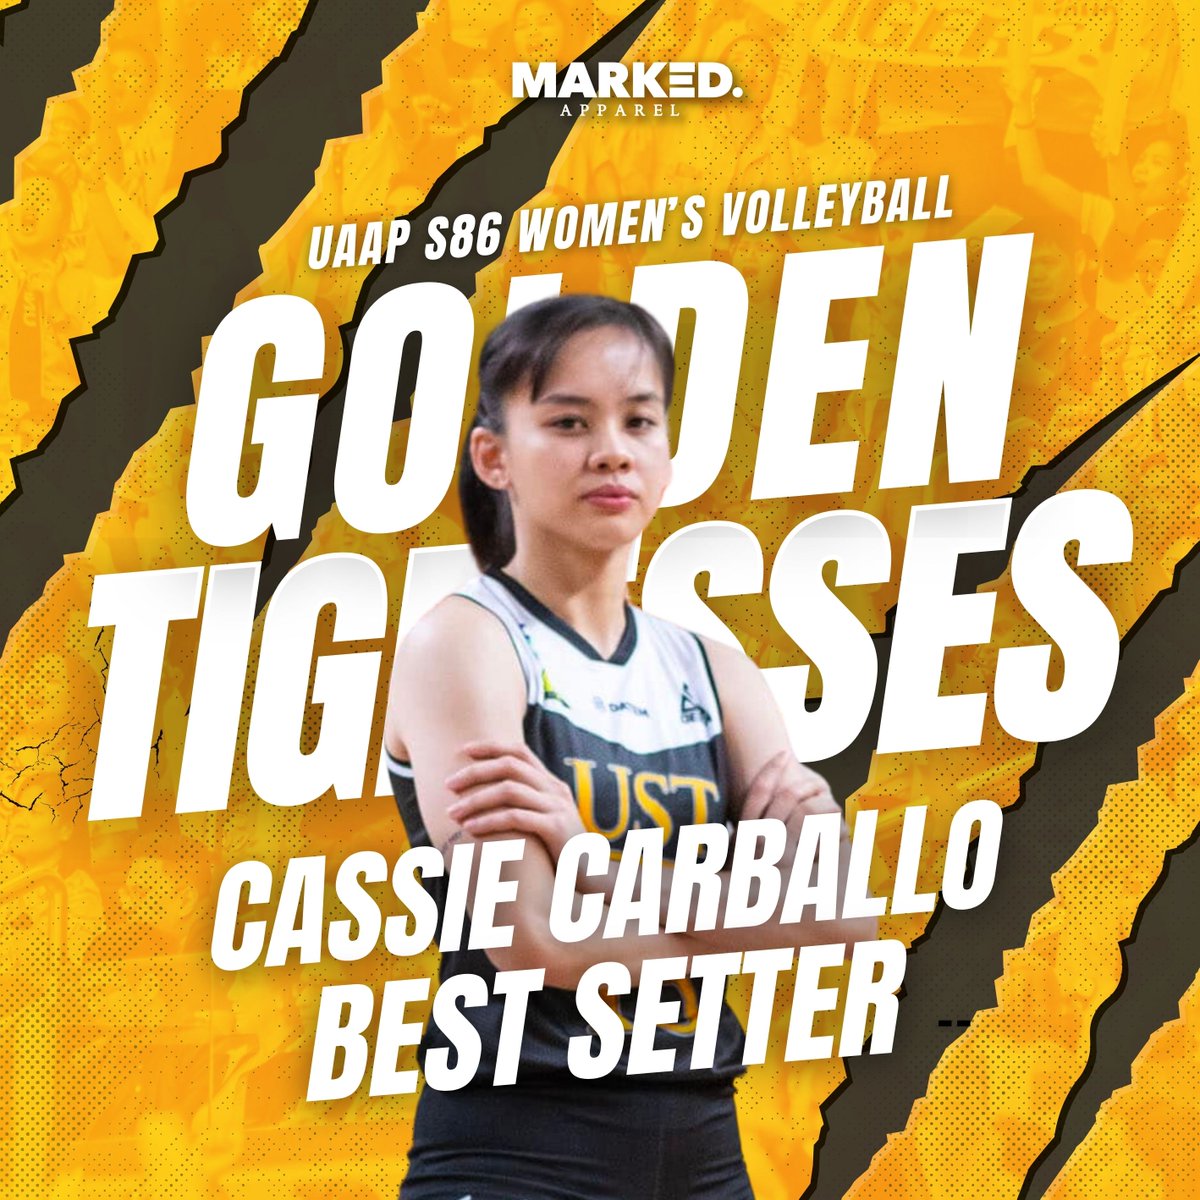 UST'S PLAYMAKER, BEST SETTER!

Congratulations to Cassie for winning the Best Setter Award! Your hard work and dedication have truly paid off!

#GoUSTe #UAAPSeason86 #UAAPVolleyball #GetMarkedNow #USTvsNU #UAAPFinals